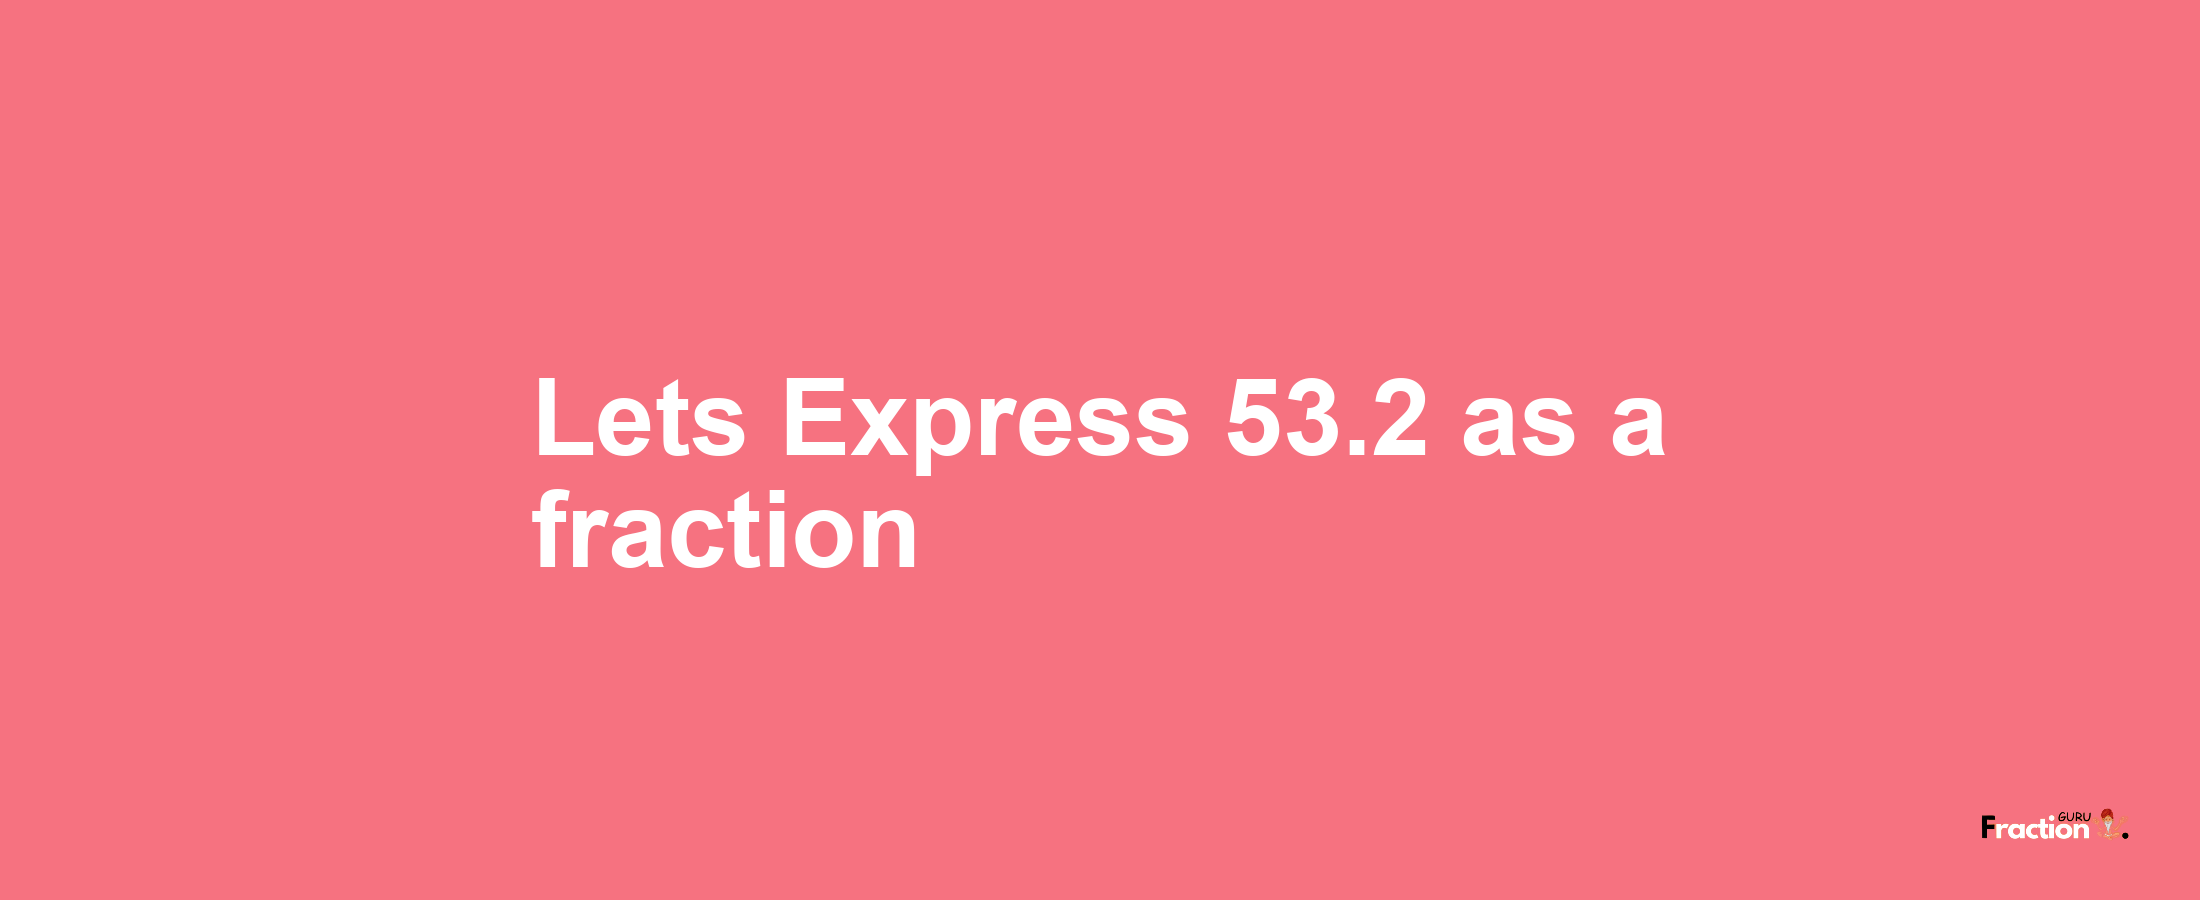 Lets Express 53.2 as afraction